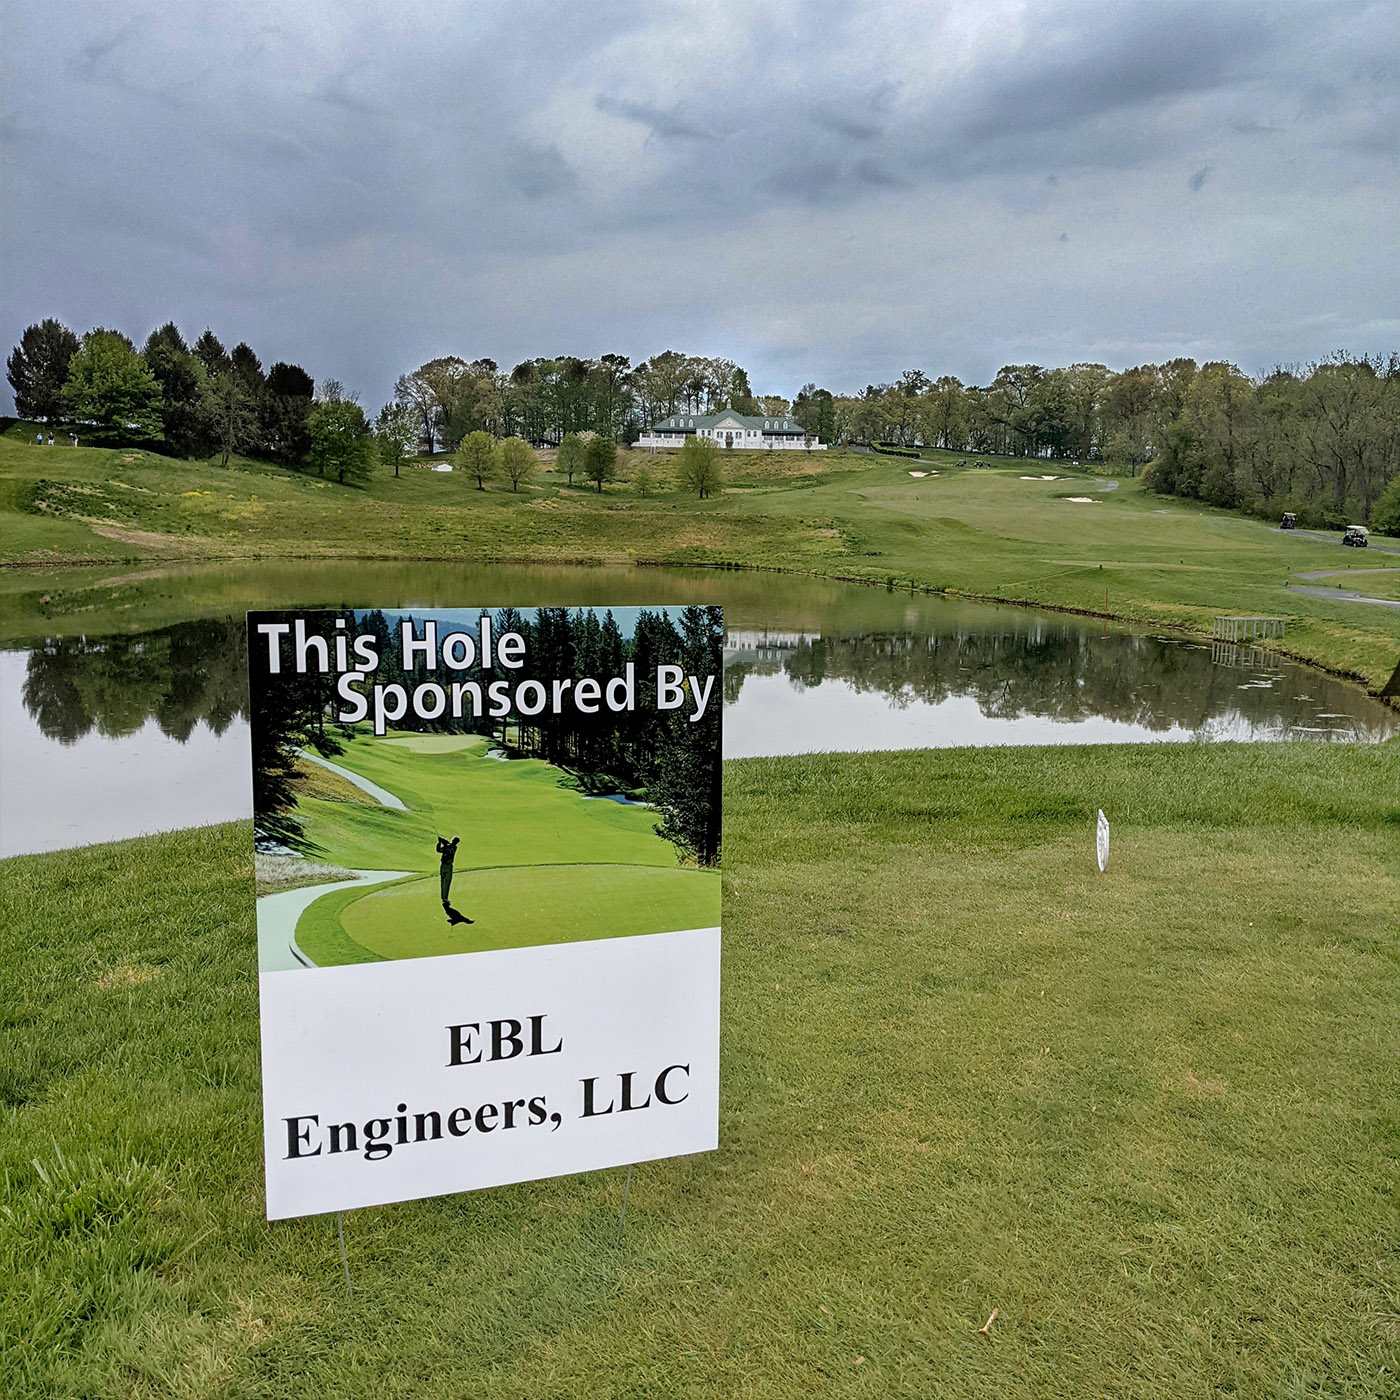 Image of sponsor sign on golf course